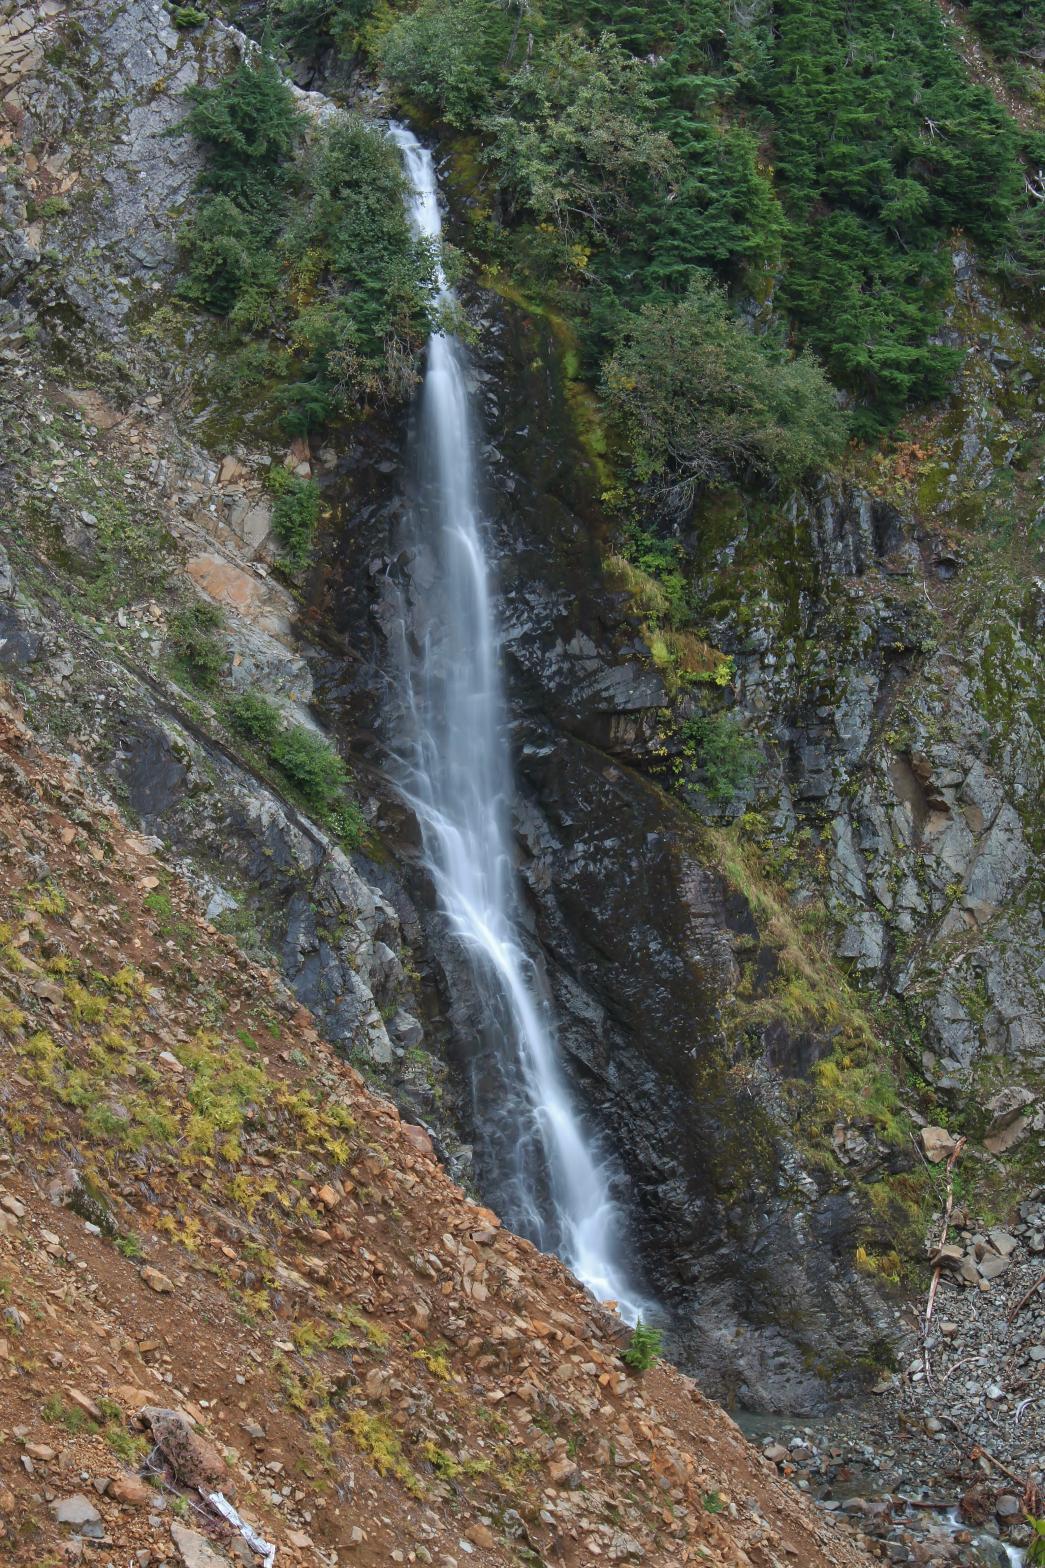 Close up view of Middle Agathot Falls